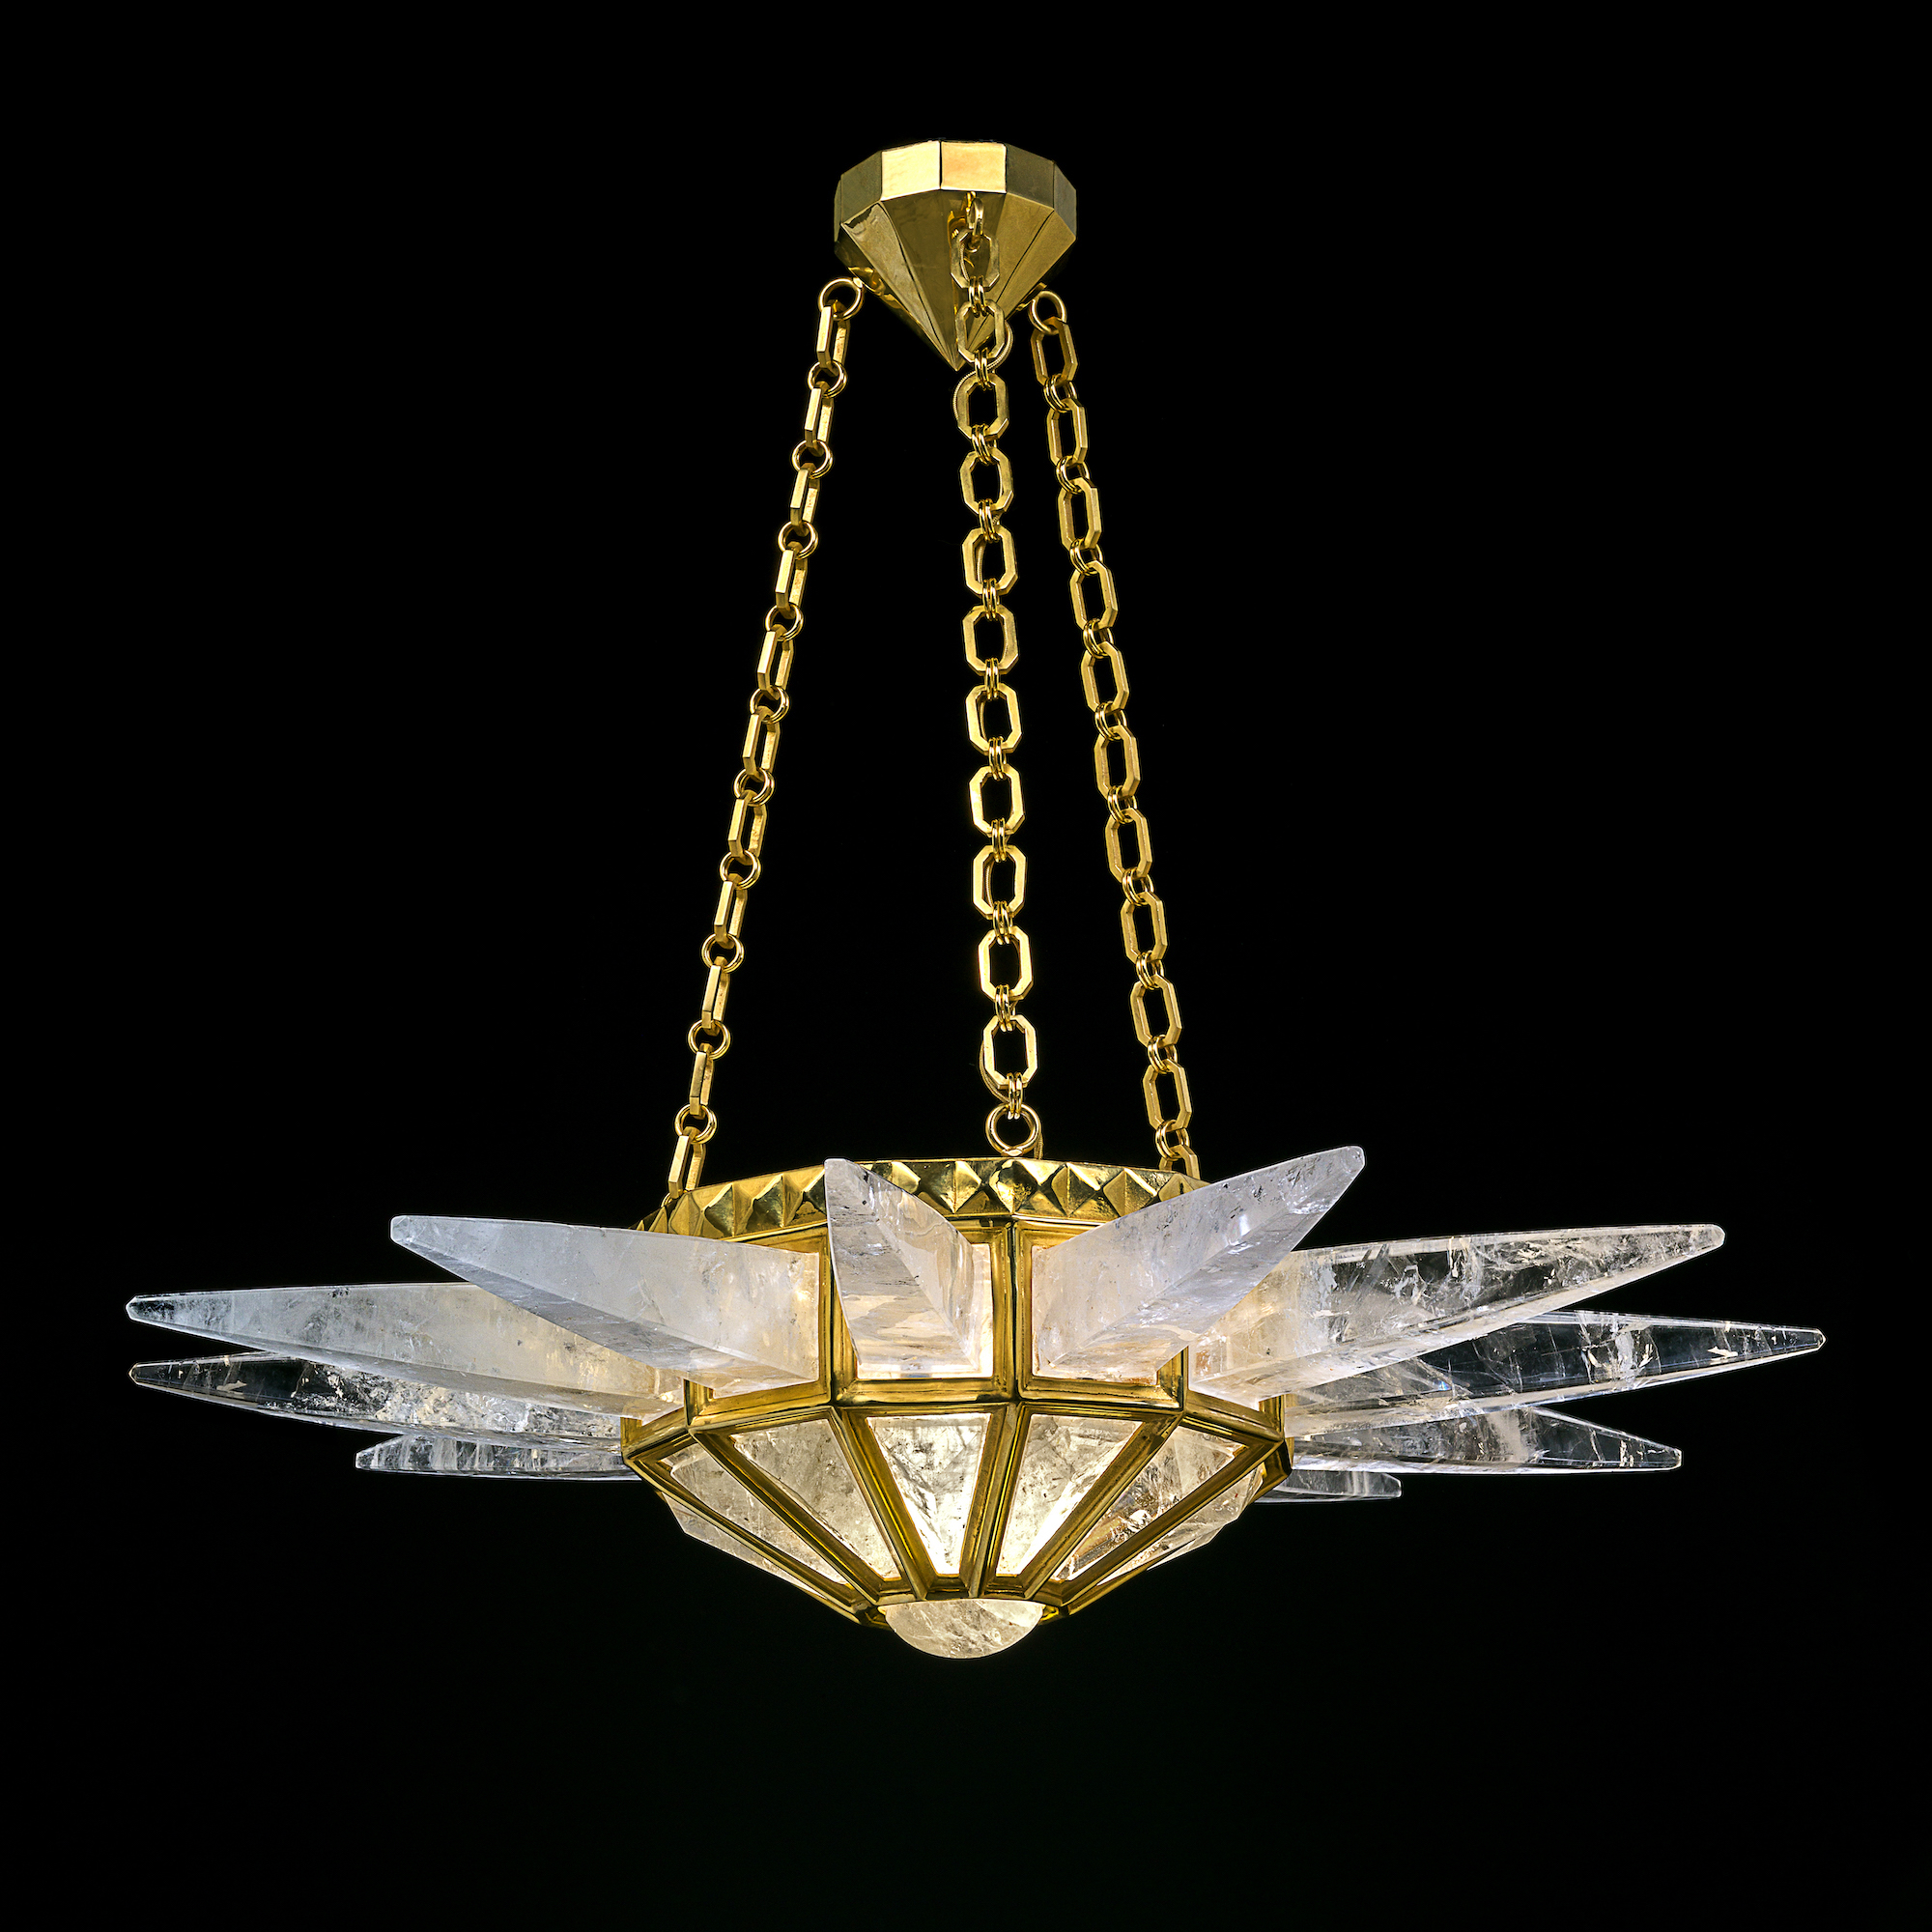 The Vossion Dream chandelier features the biggest polished rock crystals in the world - Effect Magazine